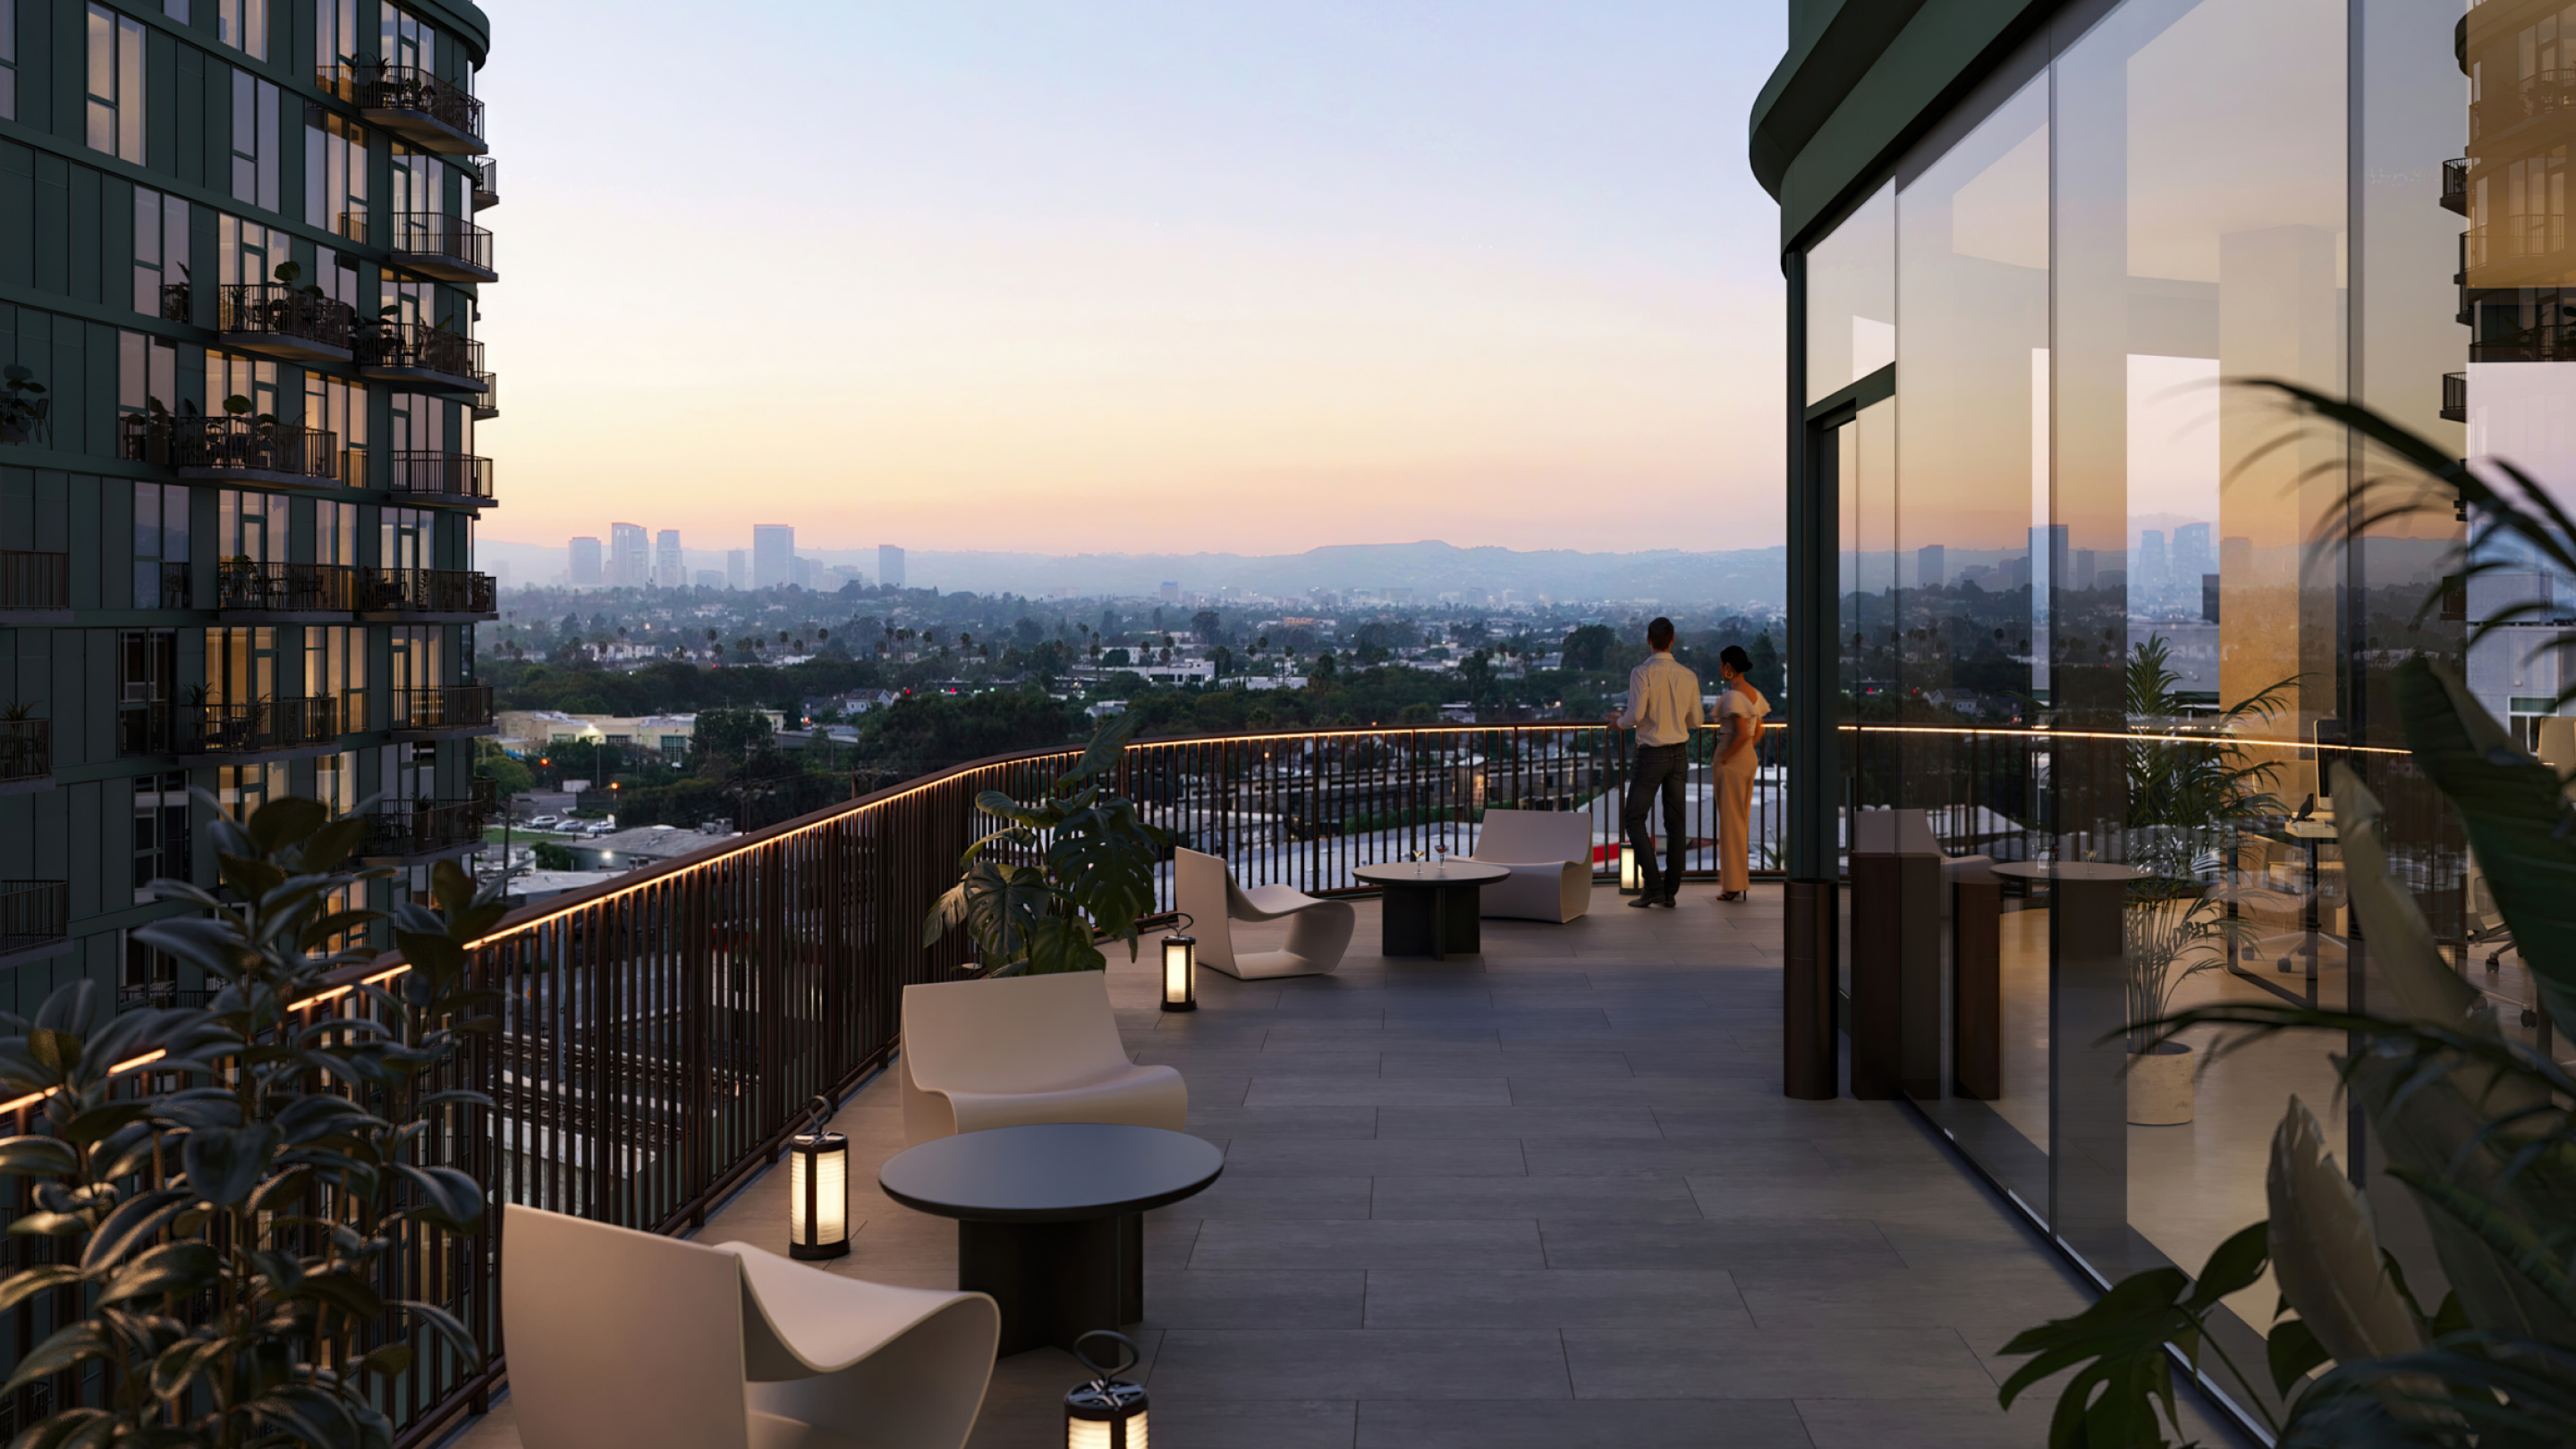 Habitat's private outdoor office terraces overlooking views of Downtown Los Angeles